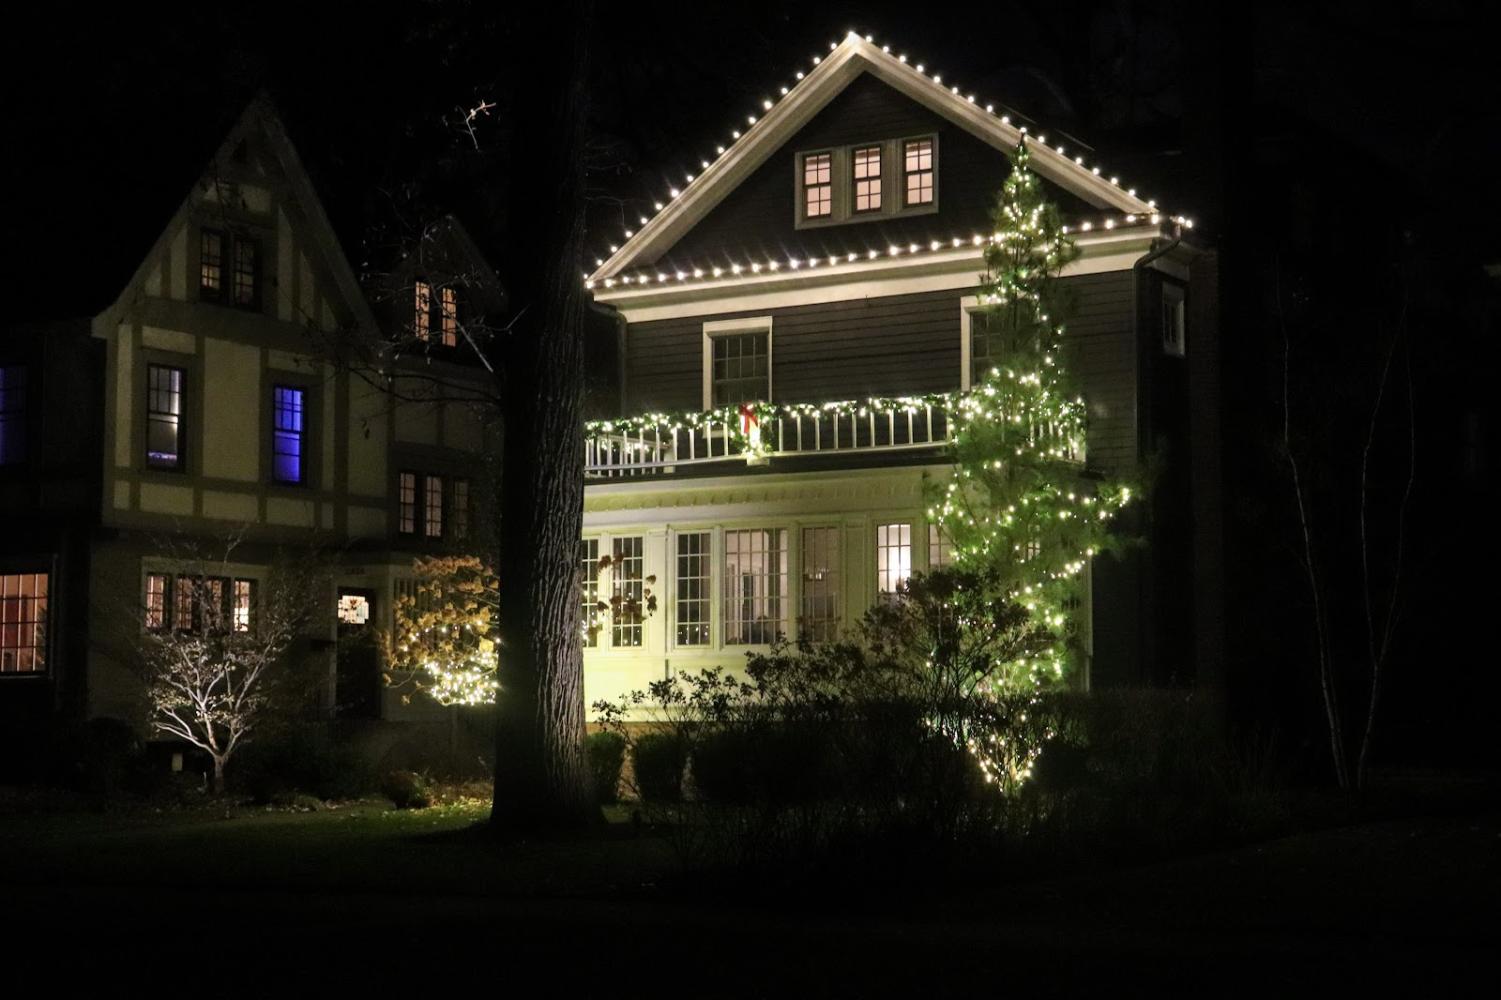 A+house+has+white+string+lights+bordering+the+roof%2C+and+lights+wrap+around+a+tree+in+the+front+yard.+The+house+also+has+garland+and+white+lights+wrapped+around+its+second-floor+balcony.